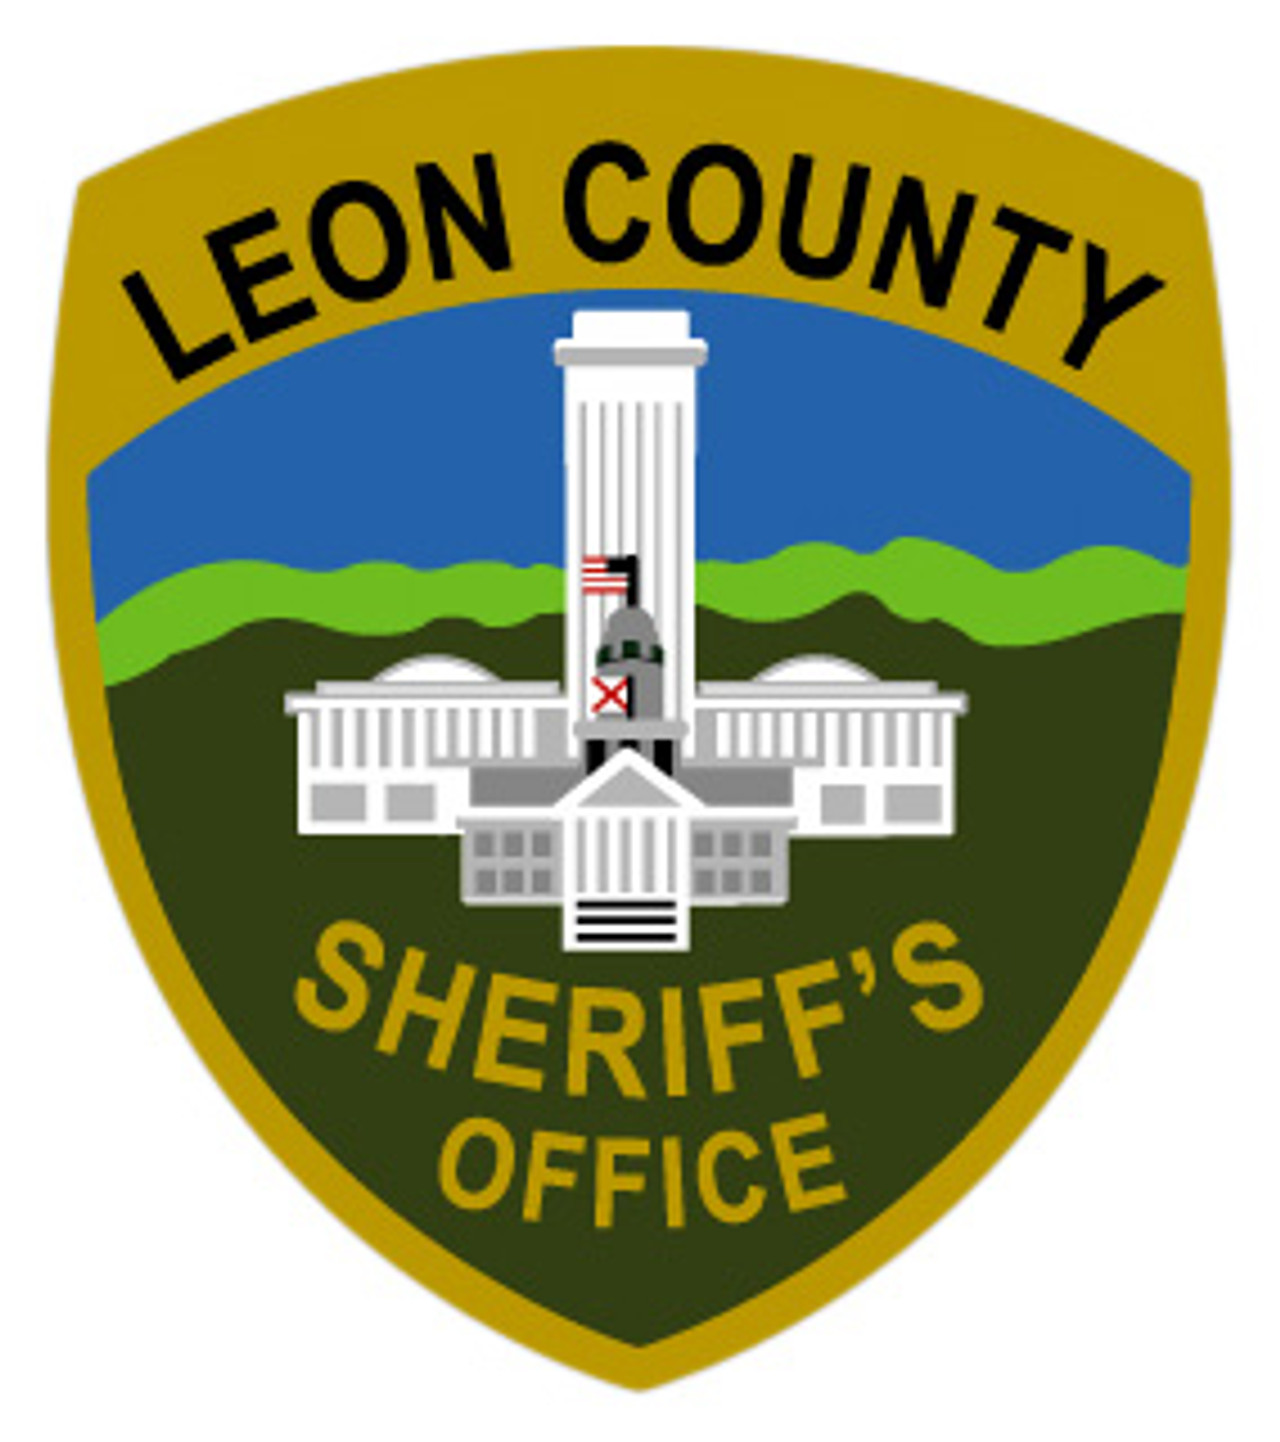 Leon County Sheriffs Office Patch Copshop A Division Of Ogs Technologies 8475